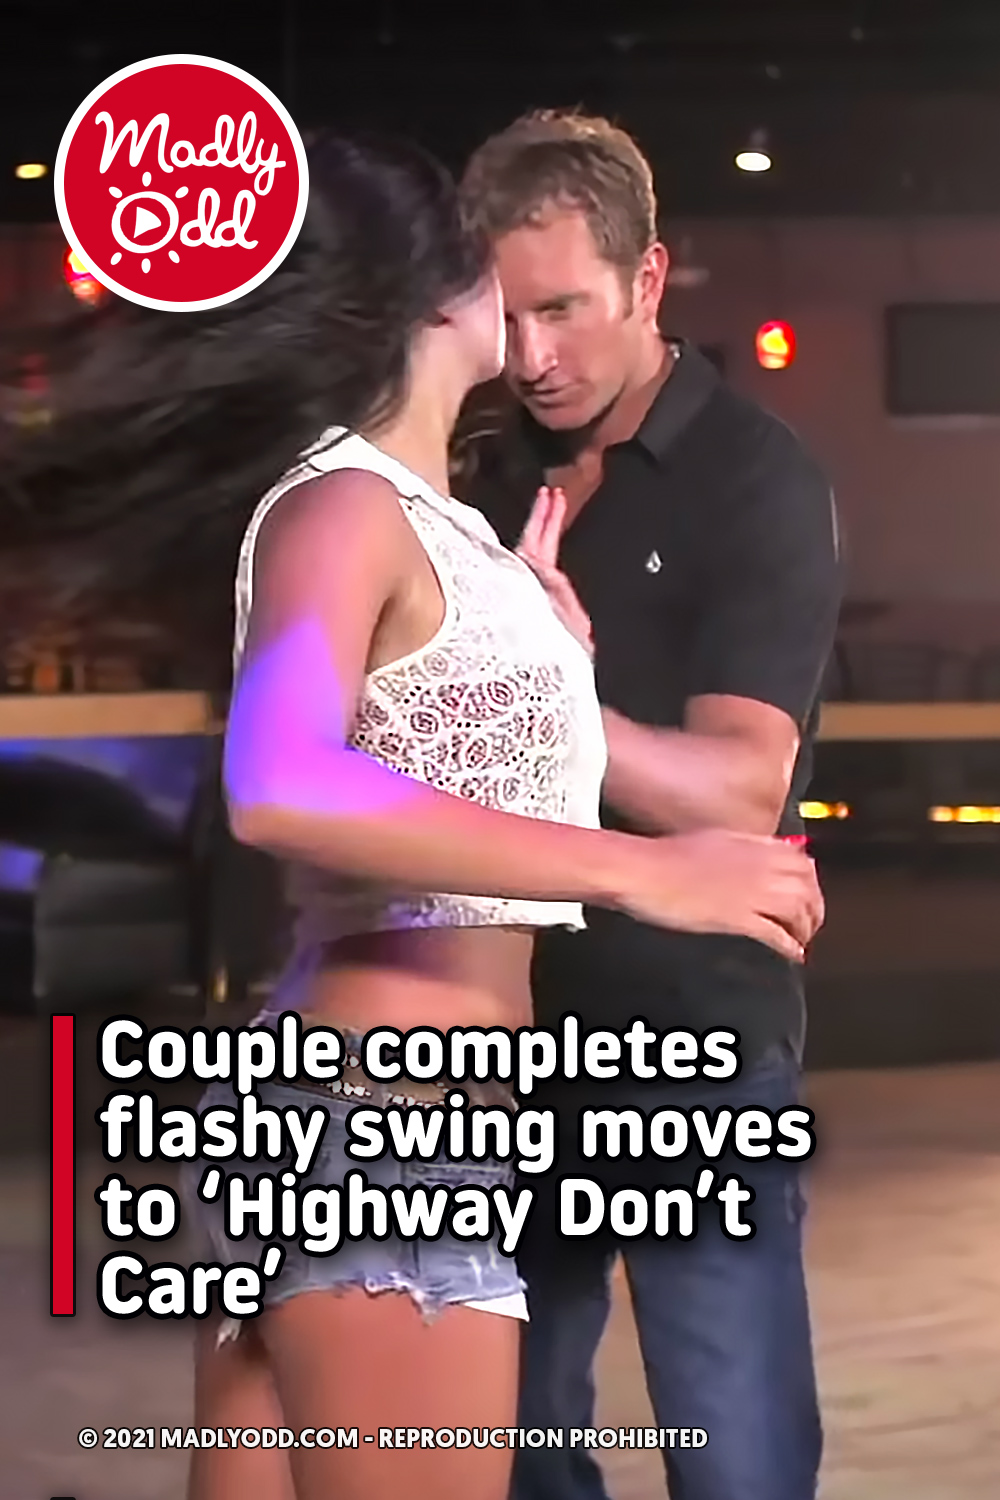 Couple completes flashy swing moves to ‘Highway Don’t Care’